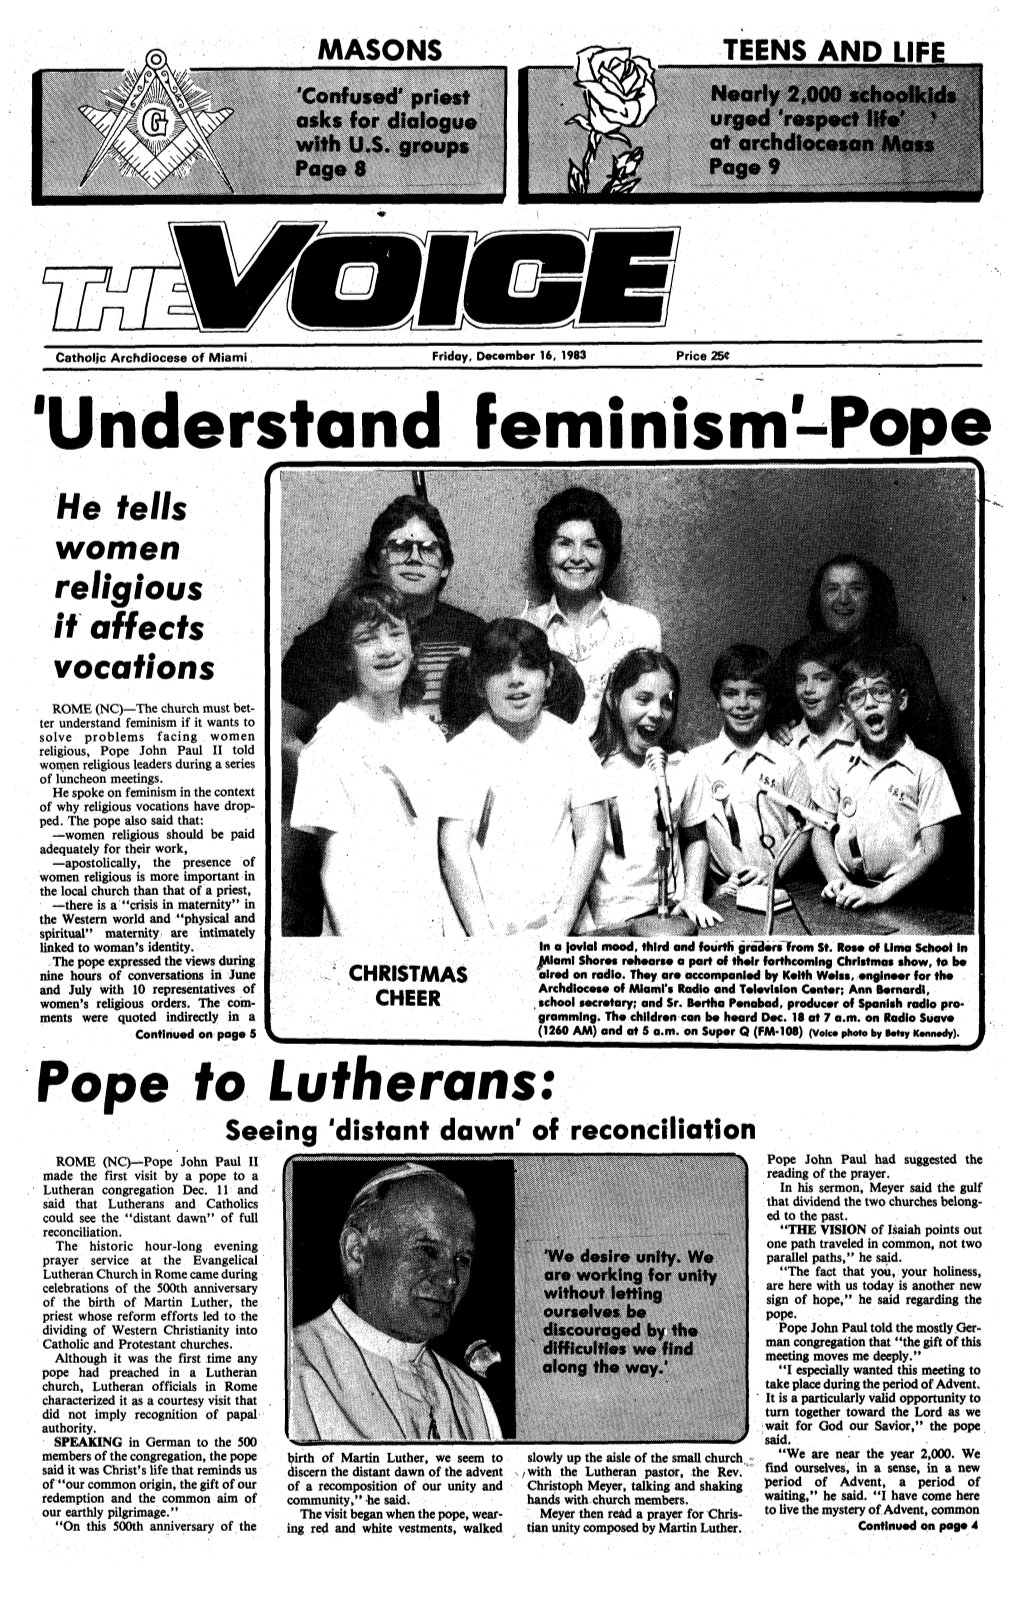 "Understand Feminism-Pope He Tells Women Religious If Affects Vocations